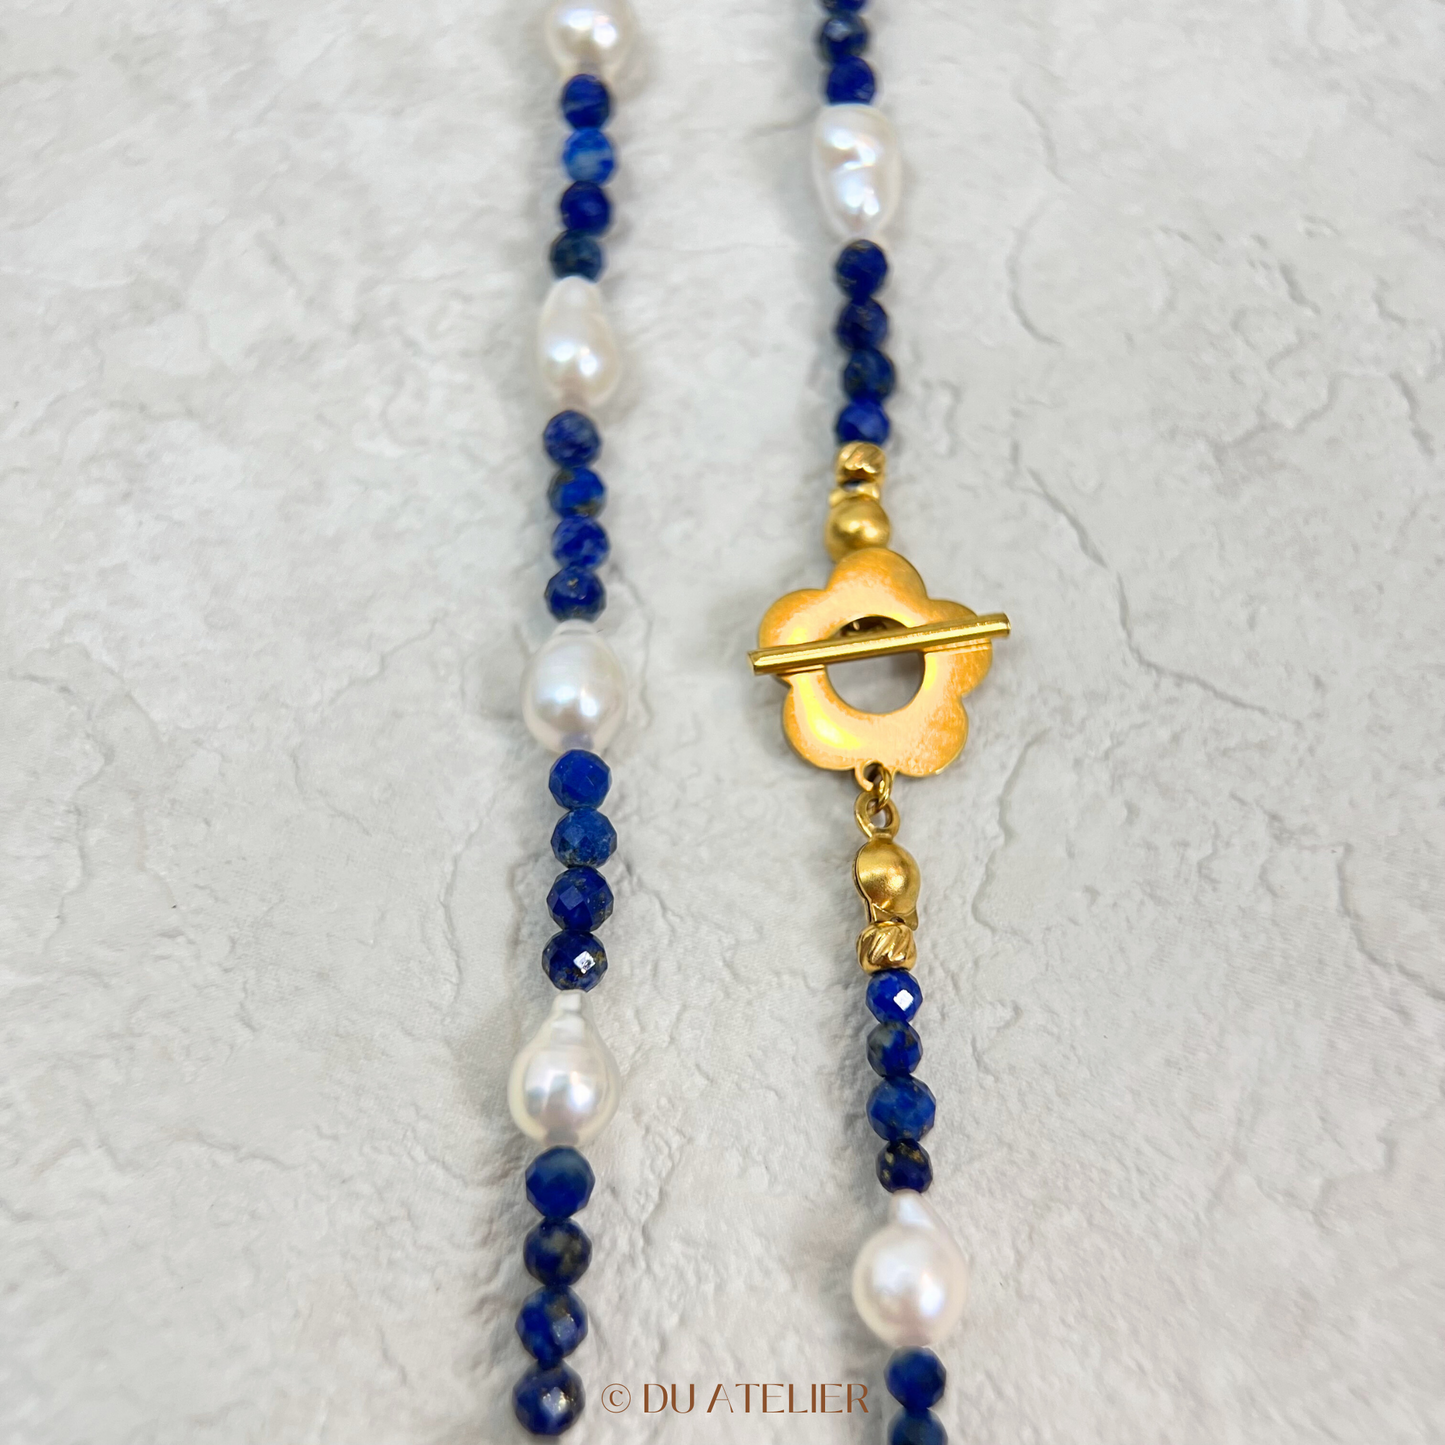 Natural Baroque Teardrop Shaped Pearl with Lapis Lazuli Necklace